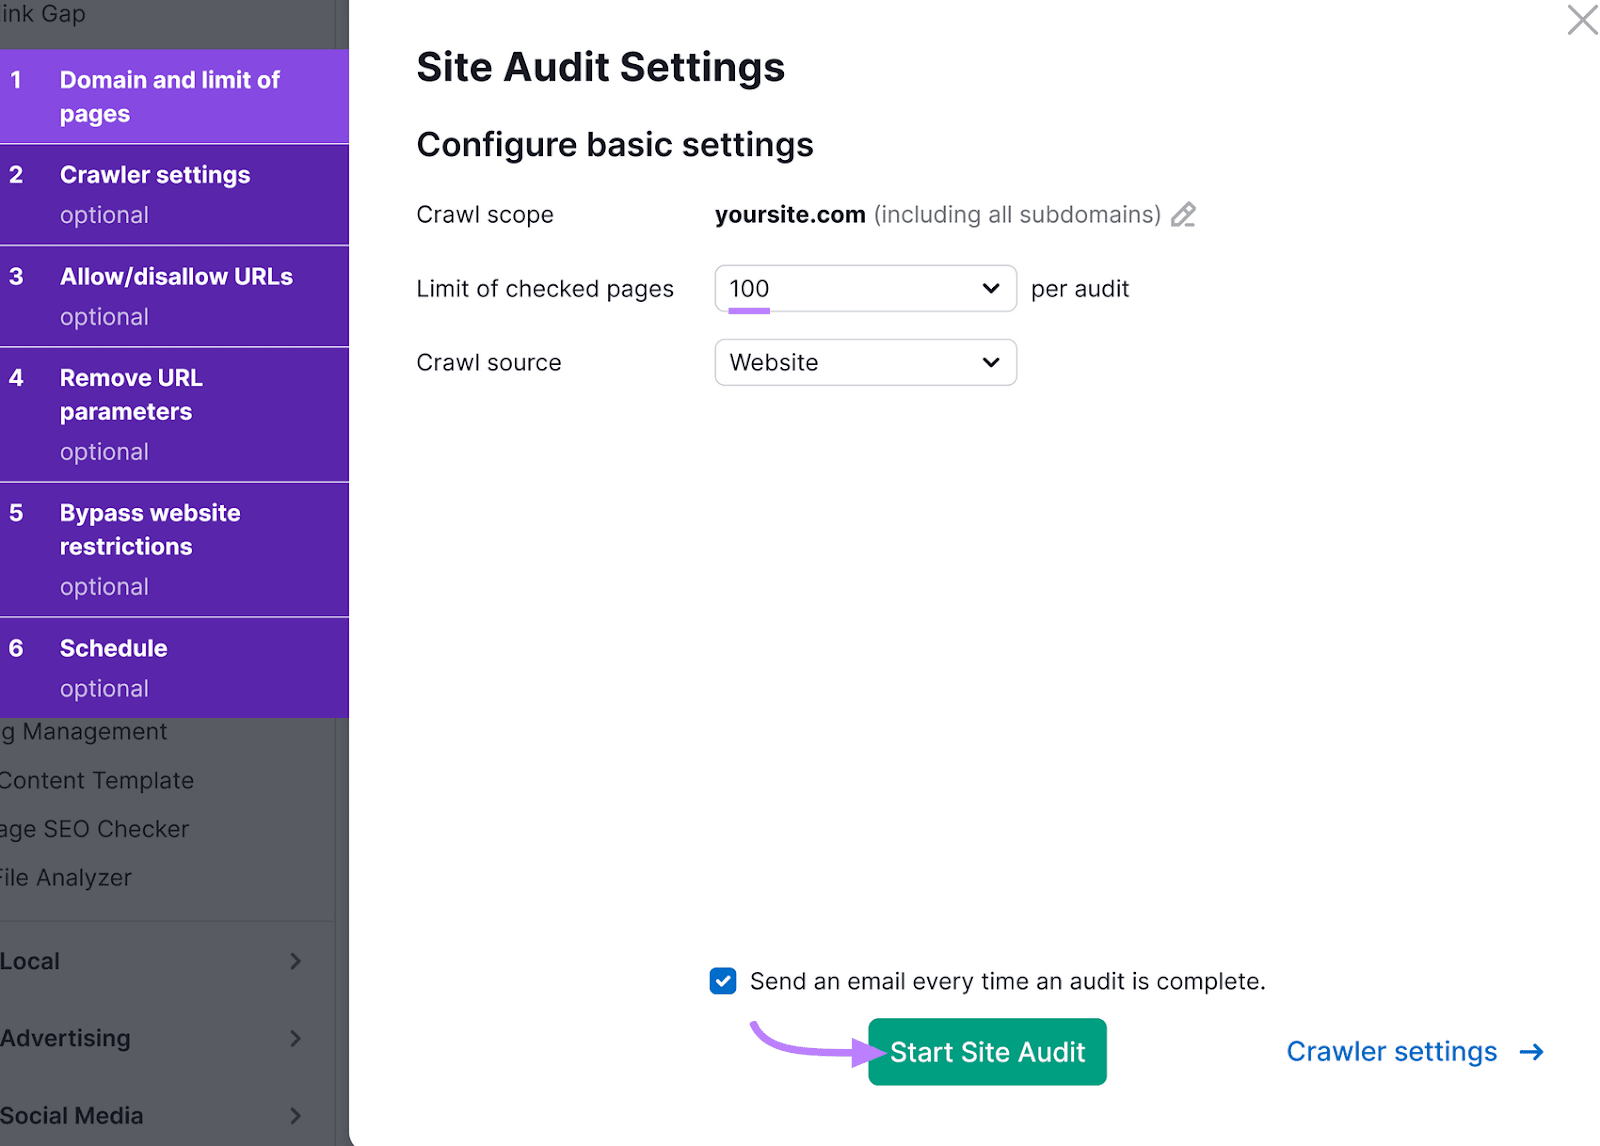 Site Audit Settings showing options to configure basic settings, with green "Start Site Audit" button highlighted with an arrow.